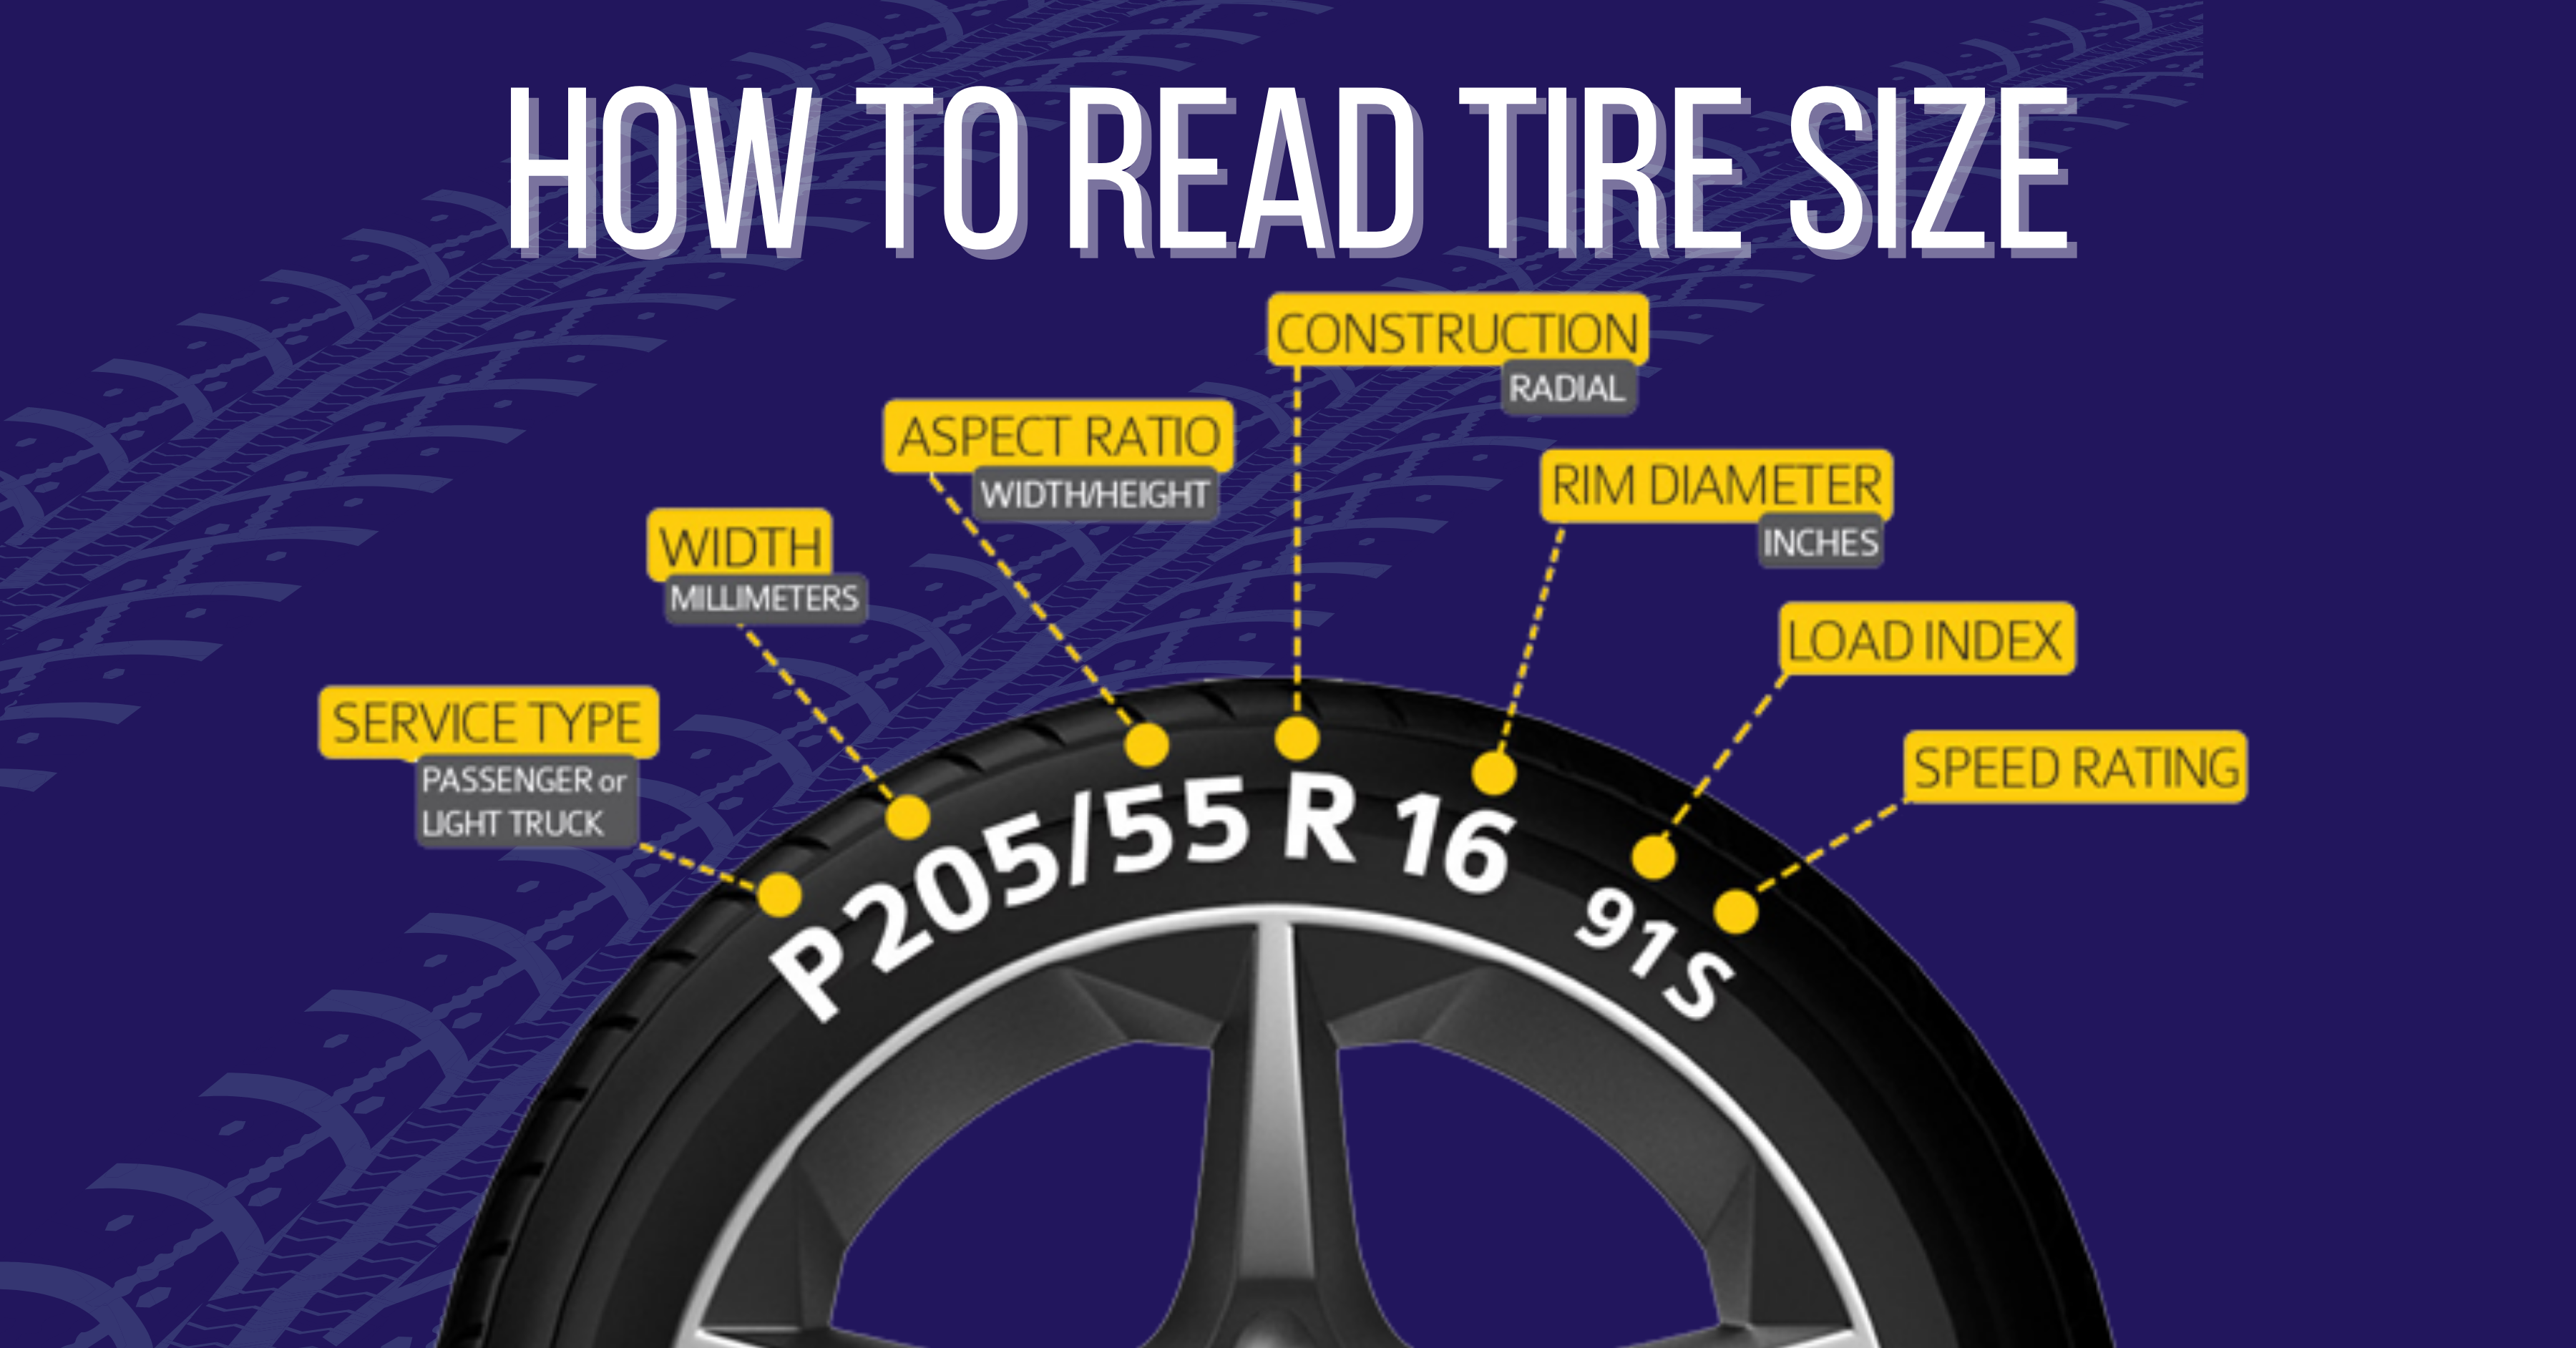 Tire Size Search How To Read Tires Size Hot Sex Picture